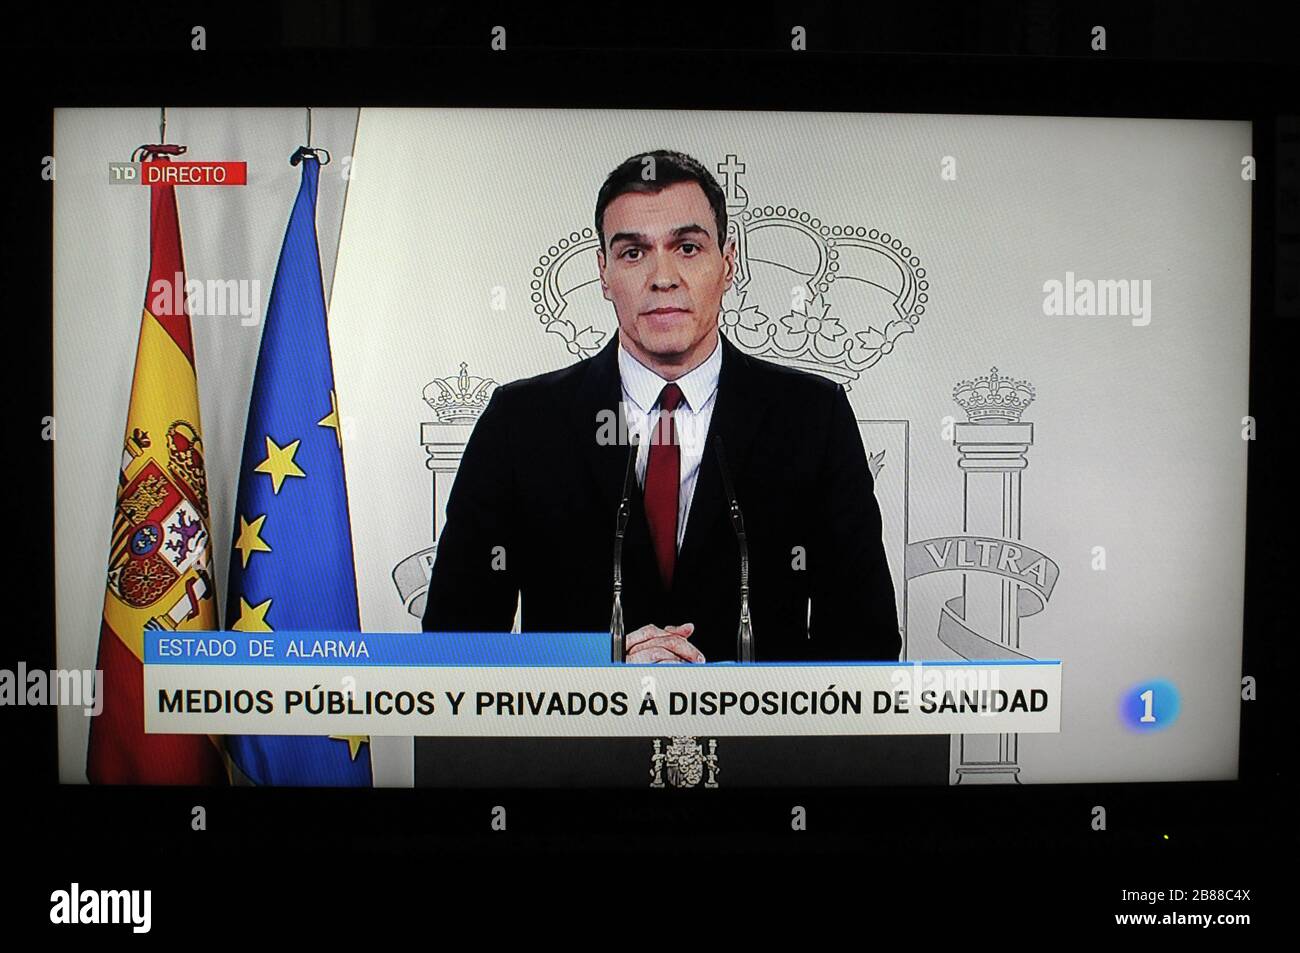 The President of the Spanish state, Pedro Sanchez transmits to citizenspublic and private means at the disposal of health to the risk of infection Stock Photo